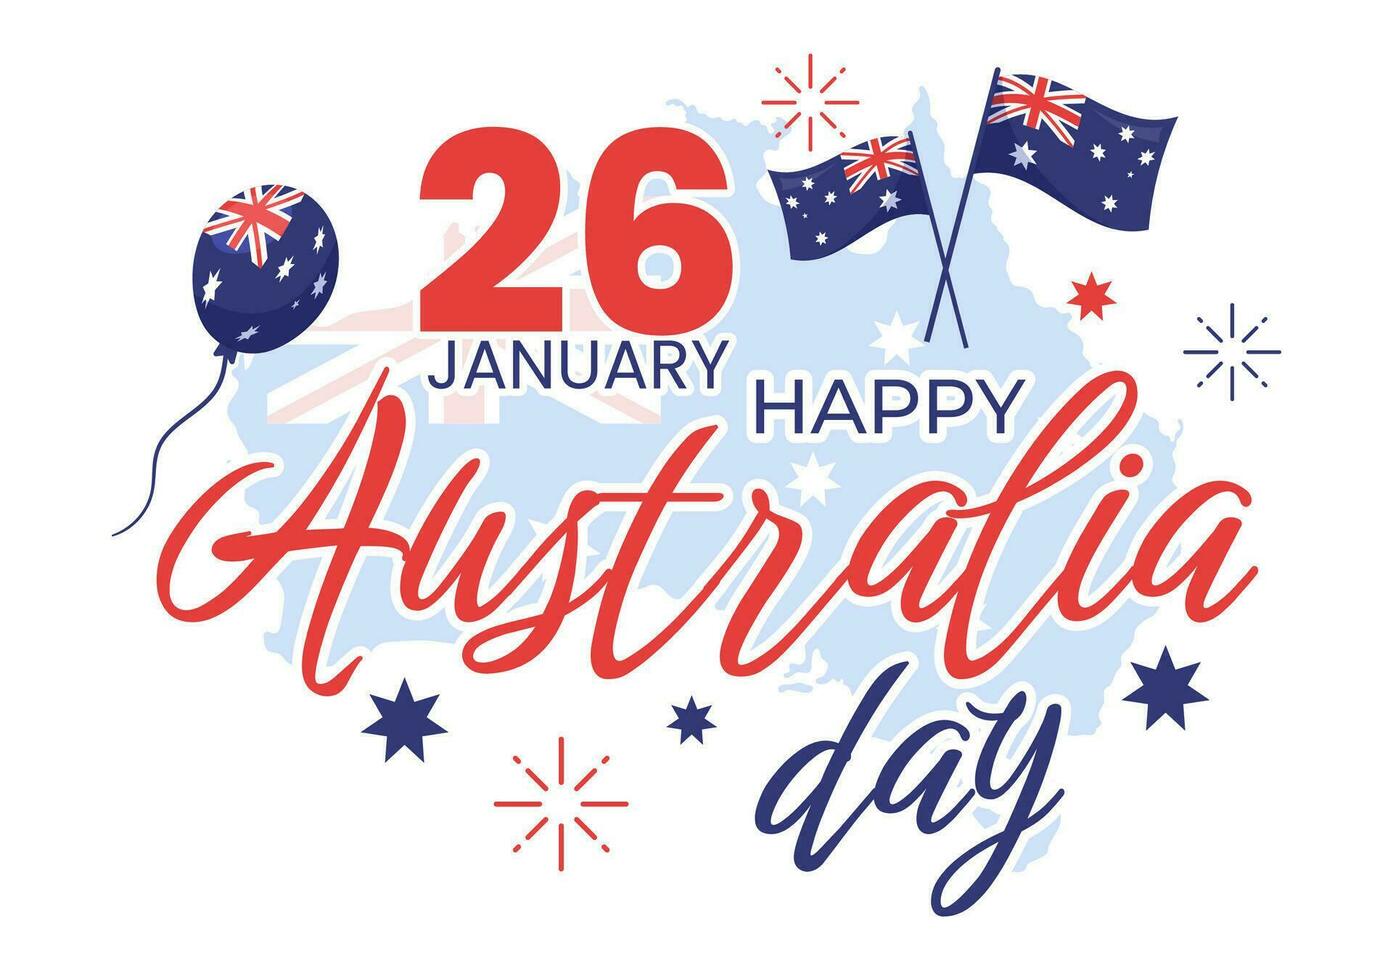 Happy Australia Day Vector Illustration on 26 January with Map and Australian Flag for Banner or Poster in Flat Cartoon Background Design